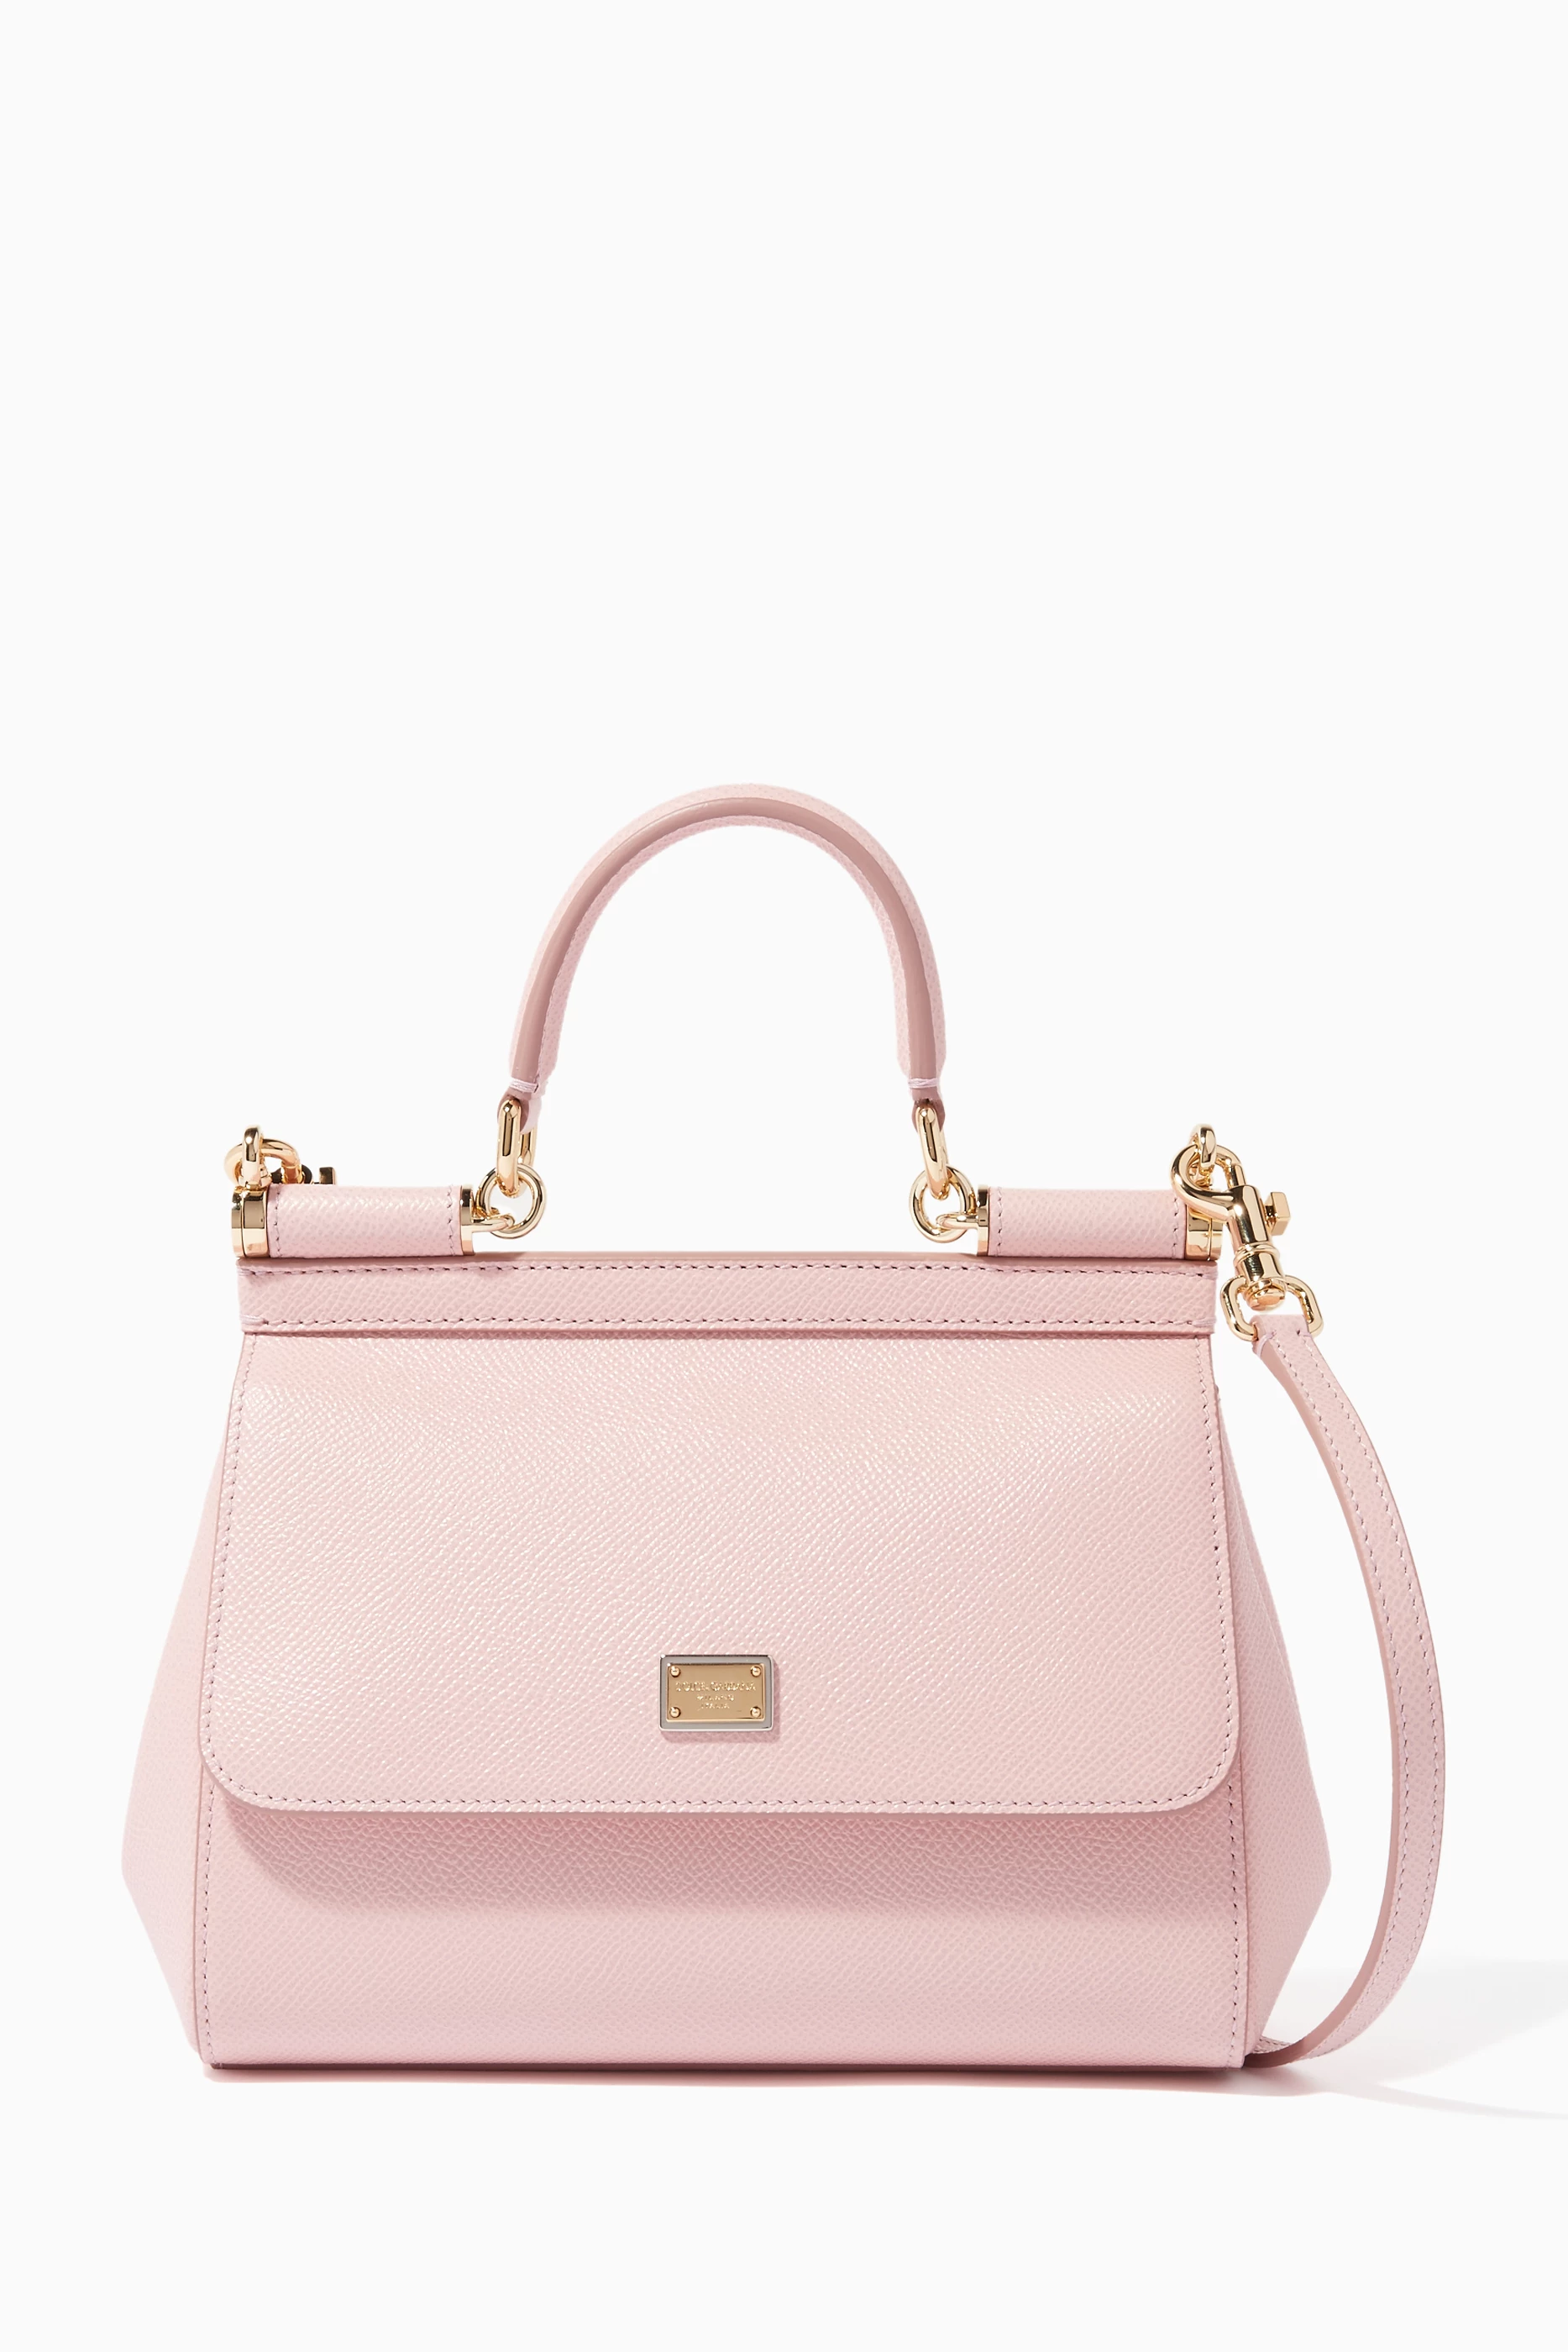 Dolce & Gabbana Small Sicily Bag in Dauphine Leather OS Pink Leather